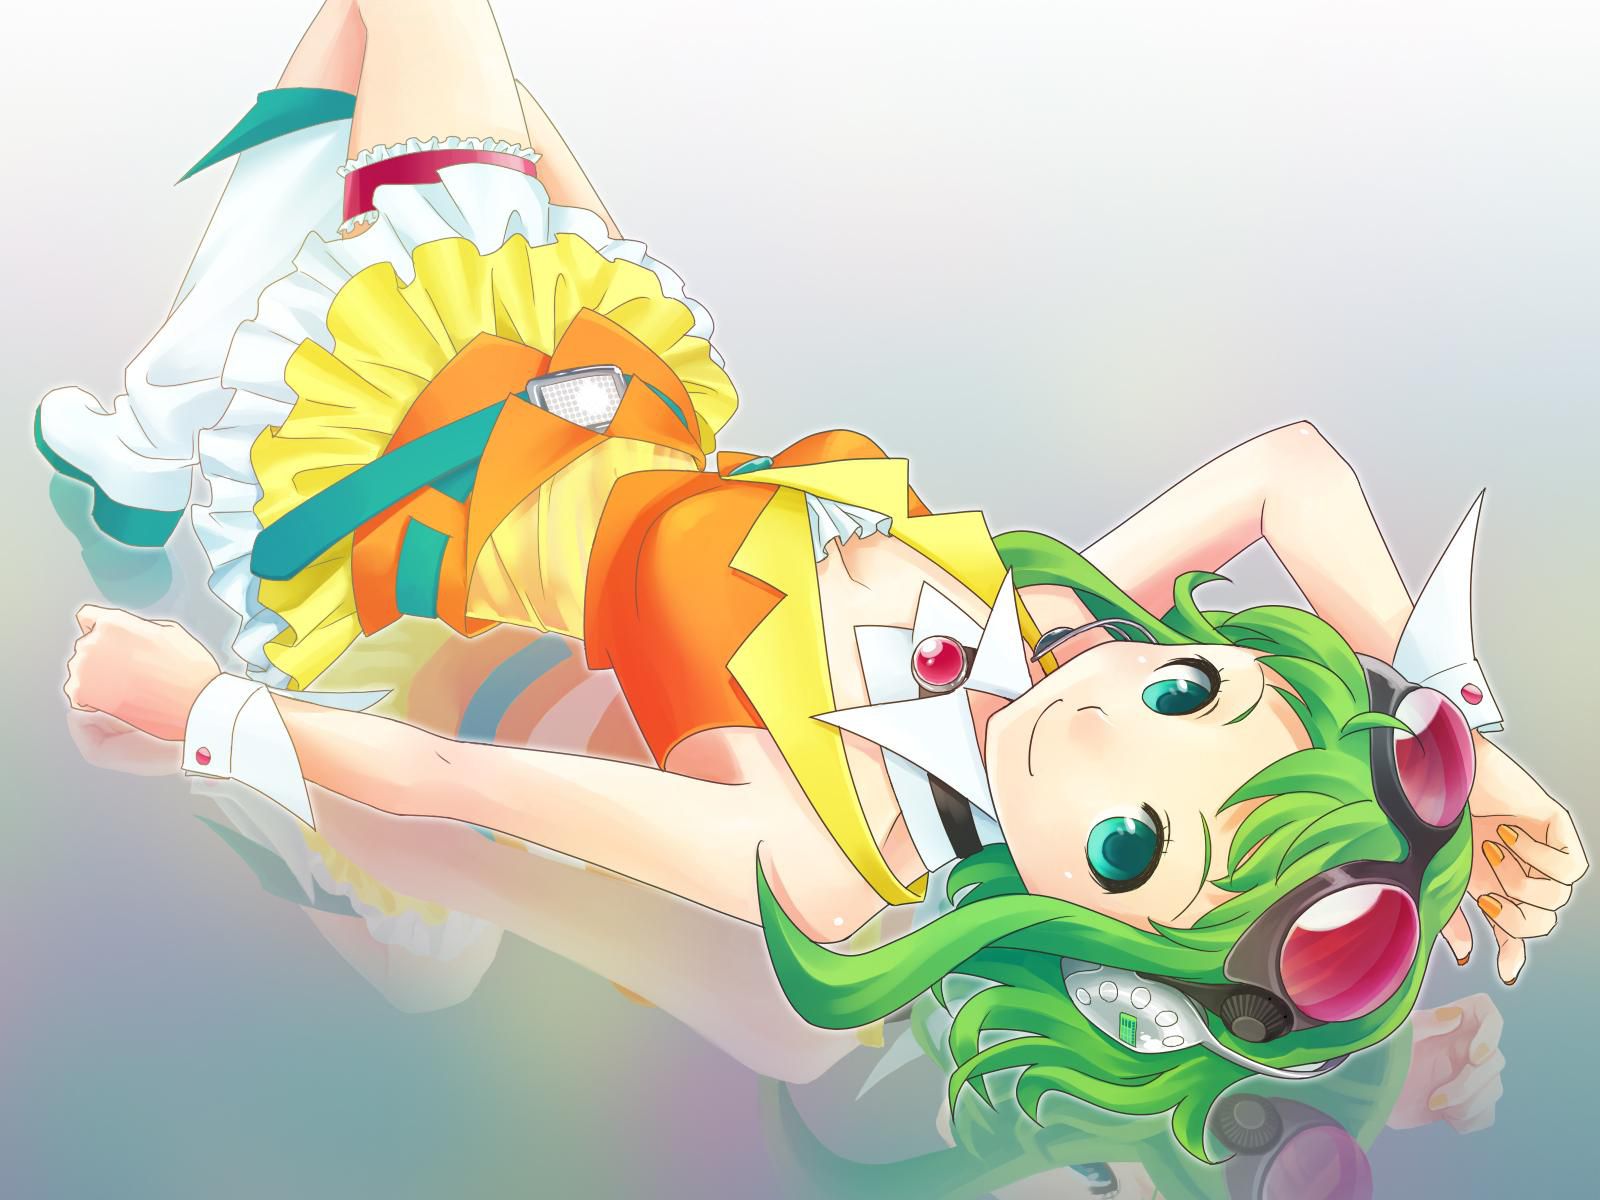 Miku's other, vocaloid's image summary. Vol. 3 23